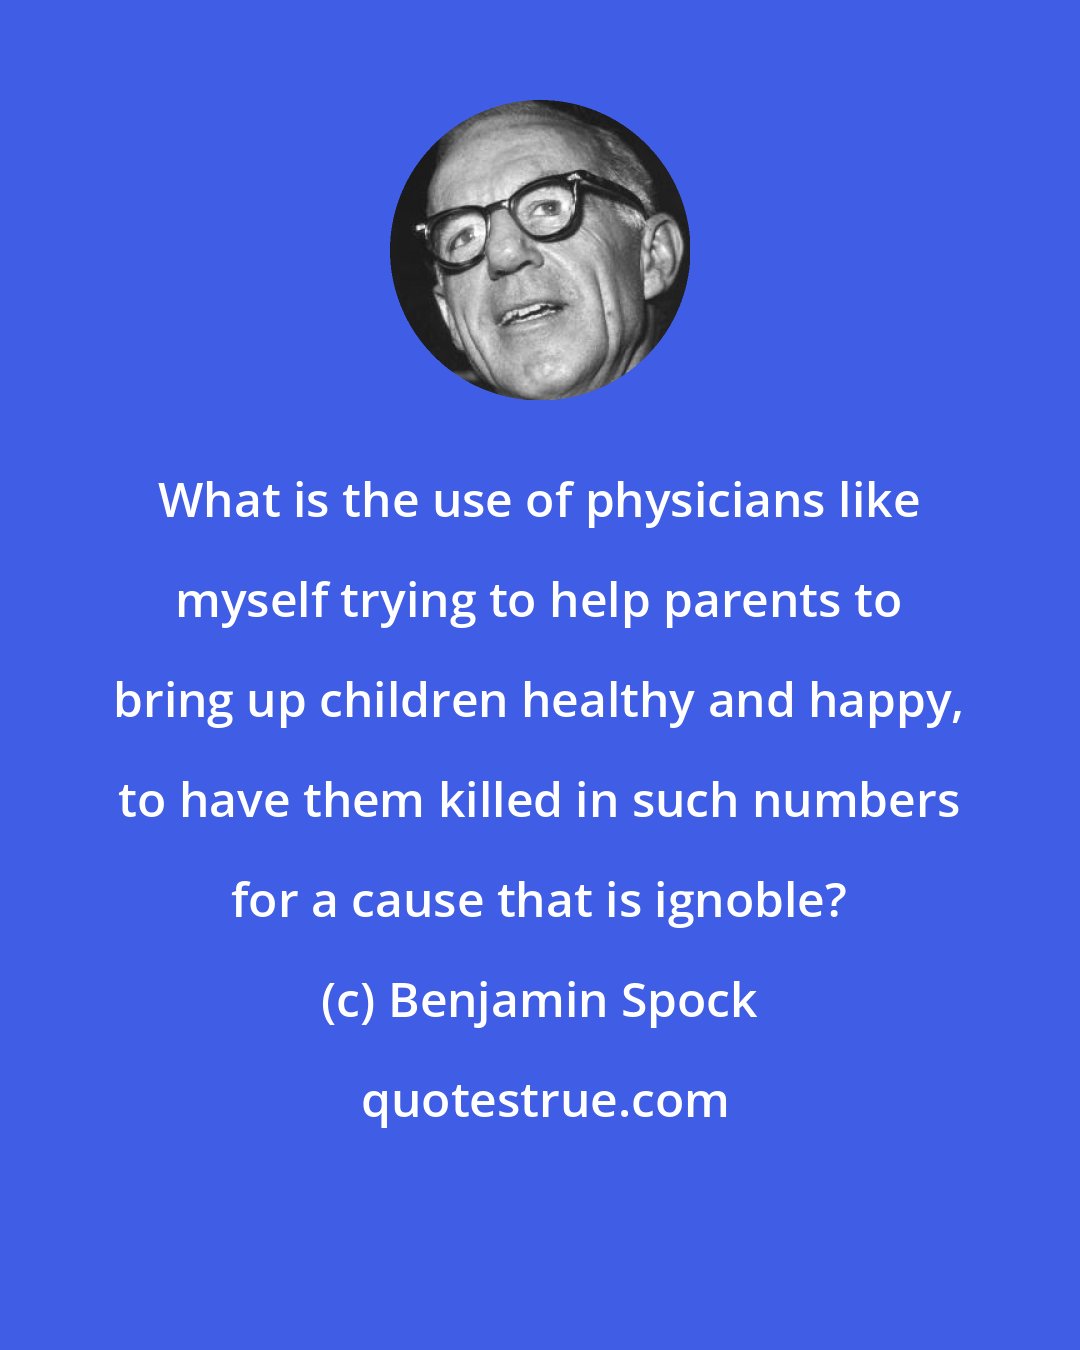 Benjamin Spock: What is the use of physicians like myself trying to help parents to bring up children healthy and happy, to have them killed in such numbers for a cause that is ignoble?